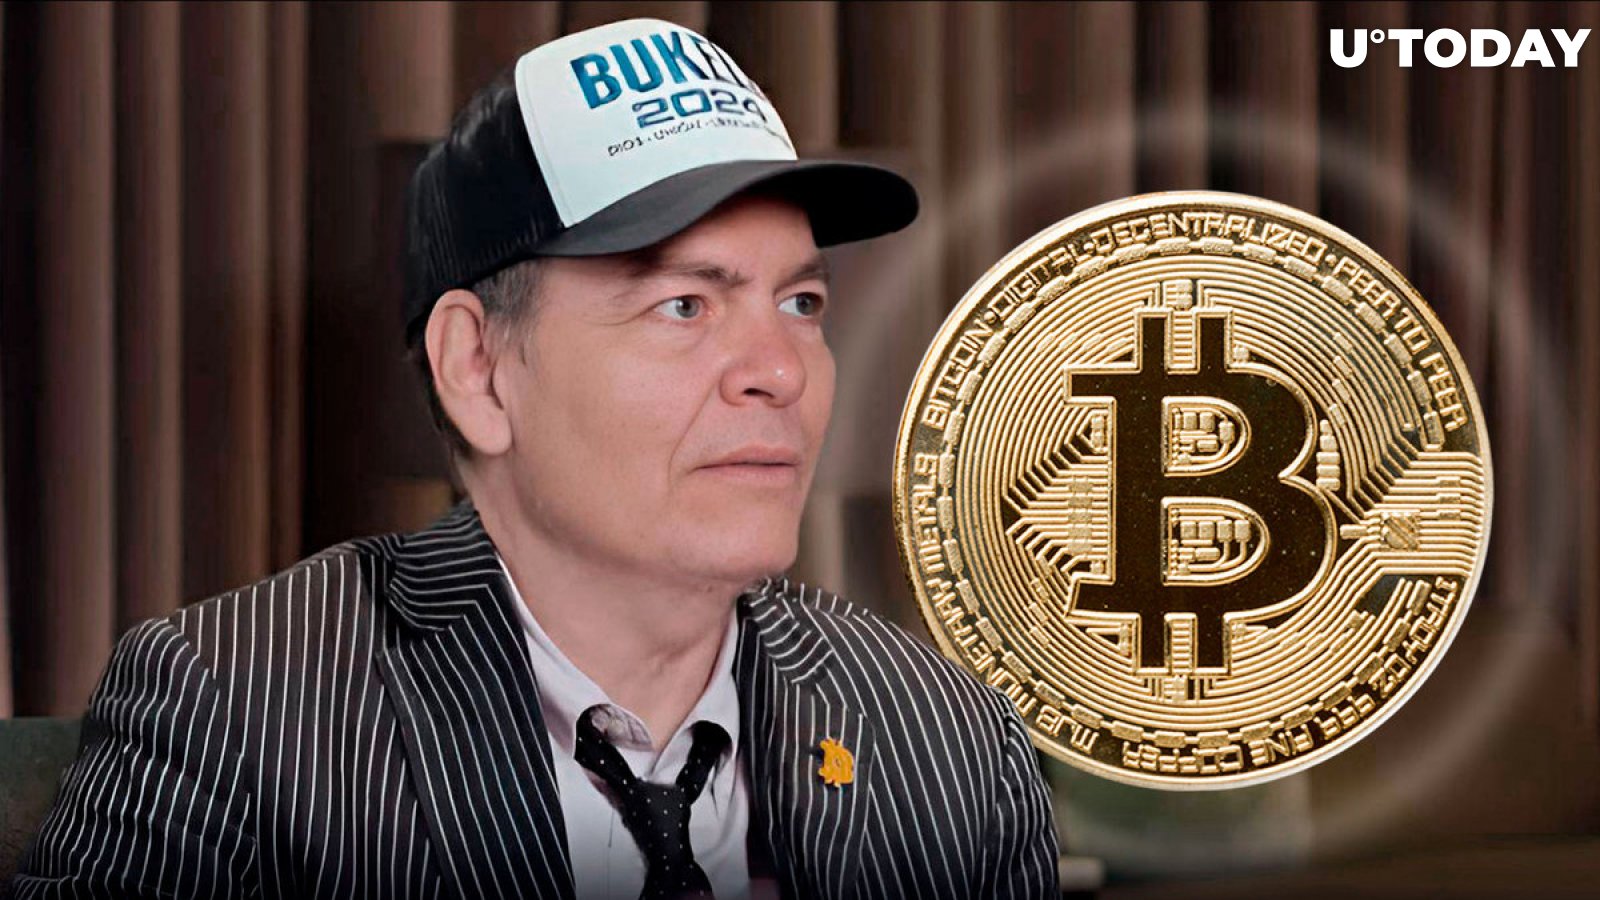 Bitcoin's 'divine candle' is coming, says Max Keizer, revealing an important reason